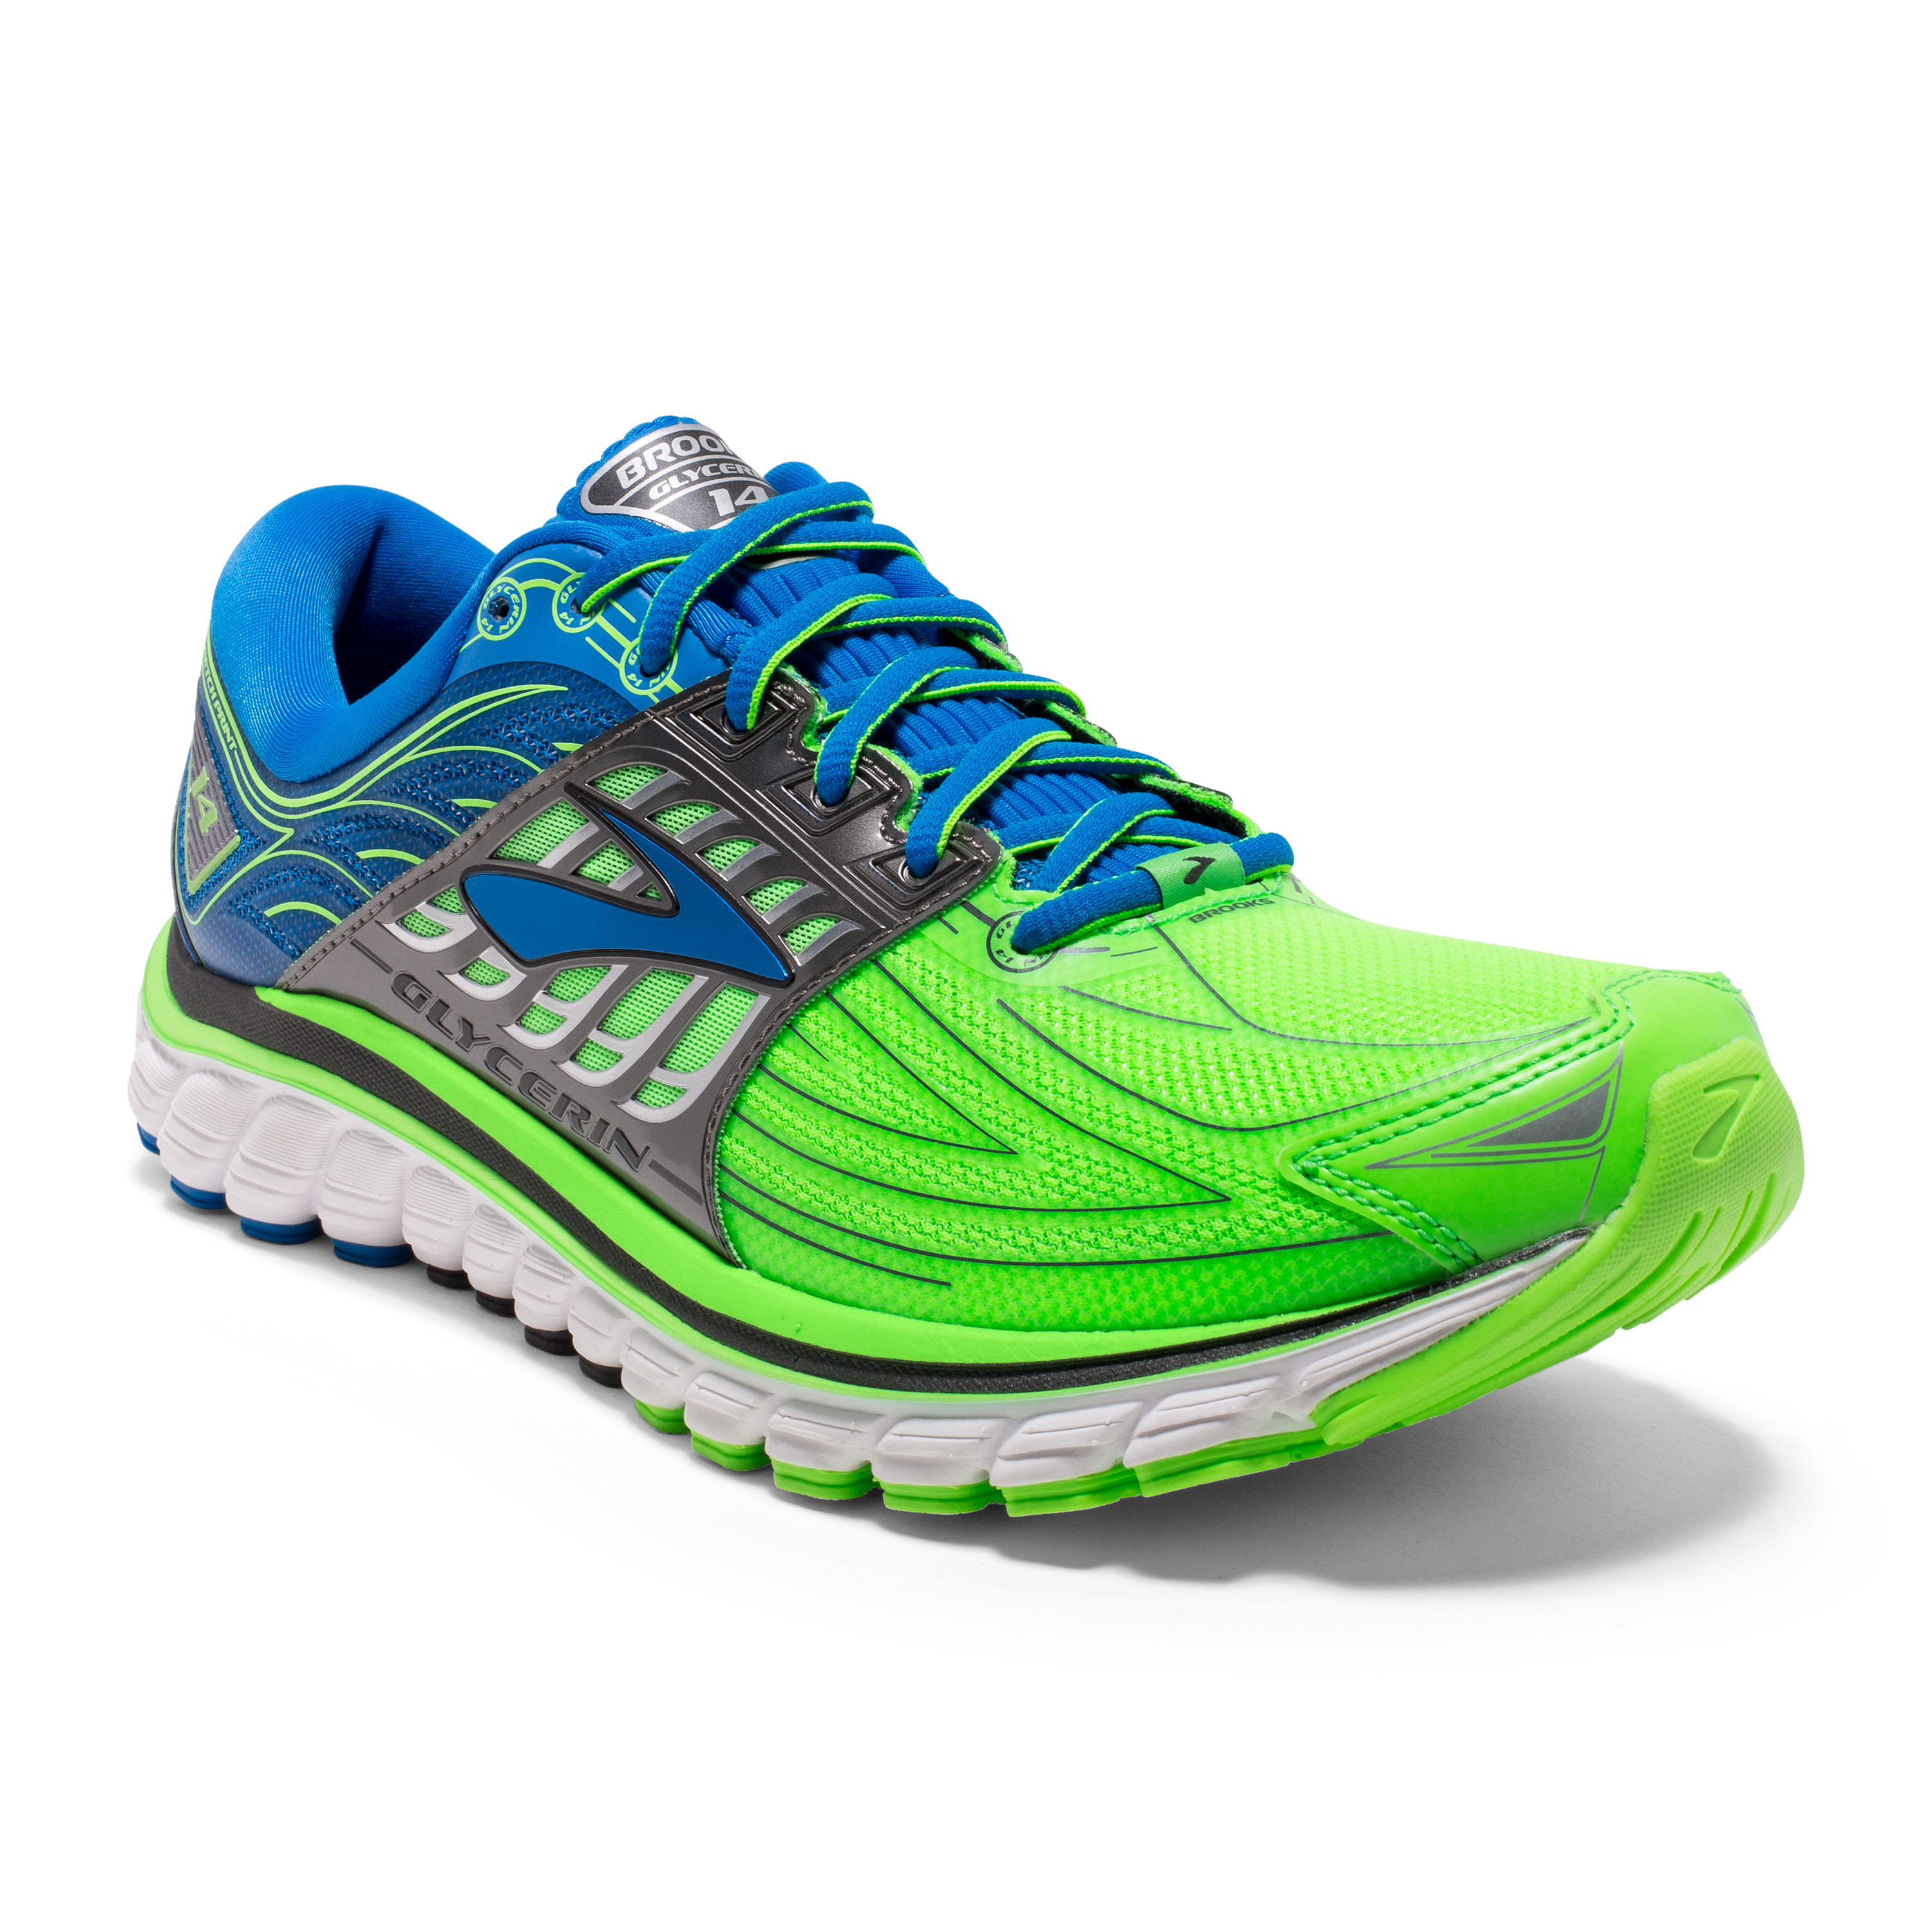 youth brooks running shoes cheap online